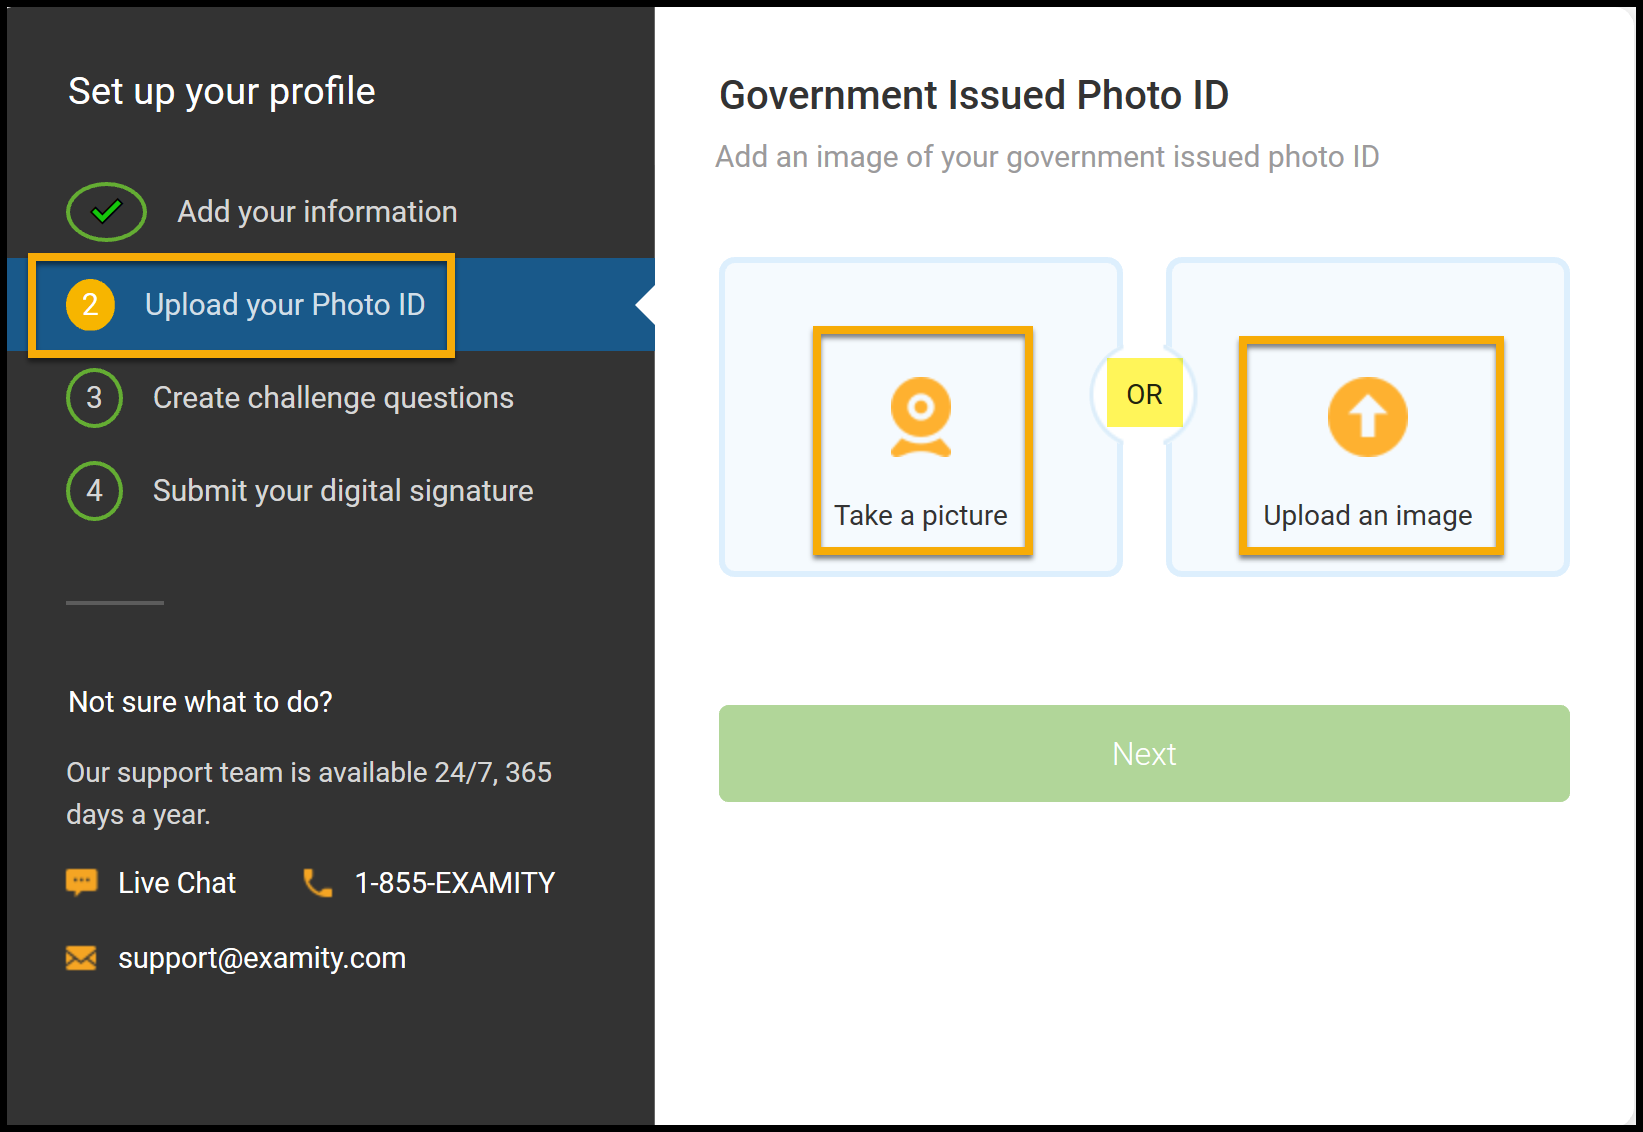 Profile page opened to Upload your Photo ID. Take and picture and Upload an image highlighted.